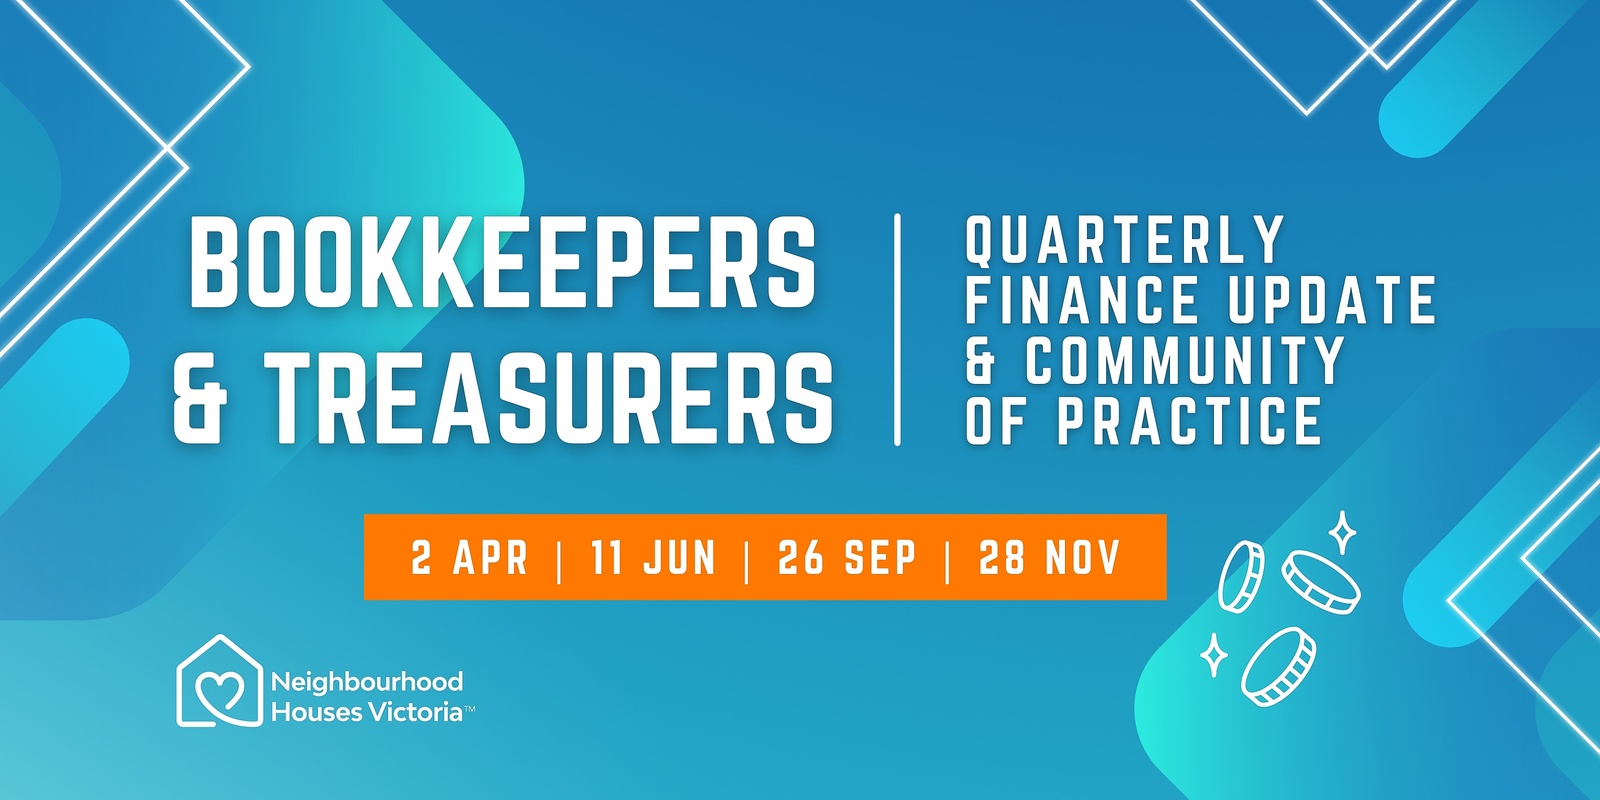 Banner image for Bookkeepers & Treasurers: Quarterly finance update #2 & community of practice